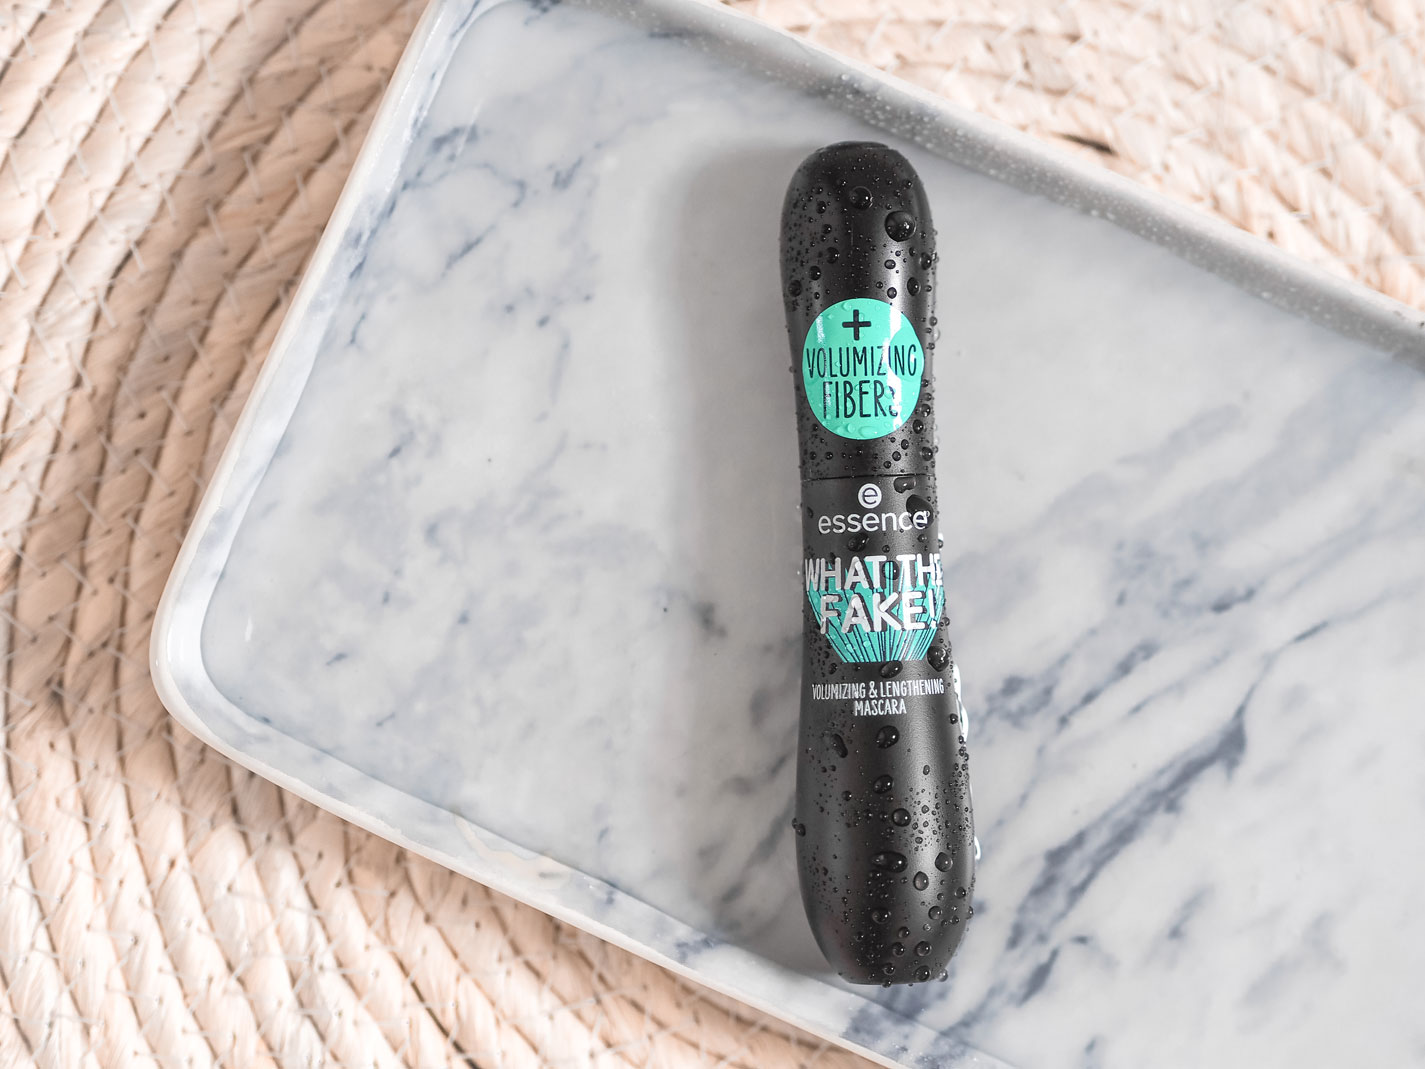 Essence what the fake mascara review